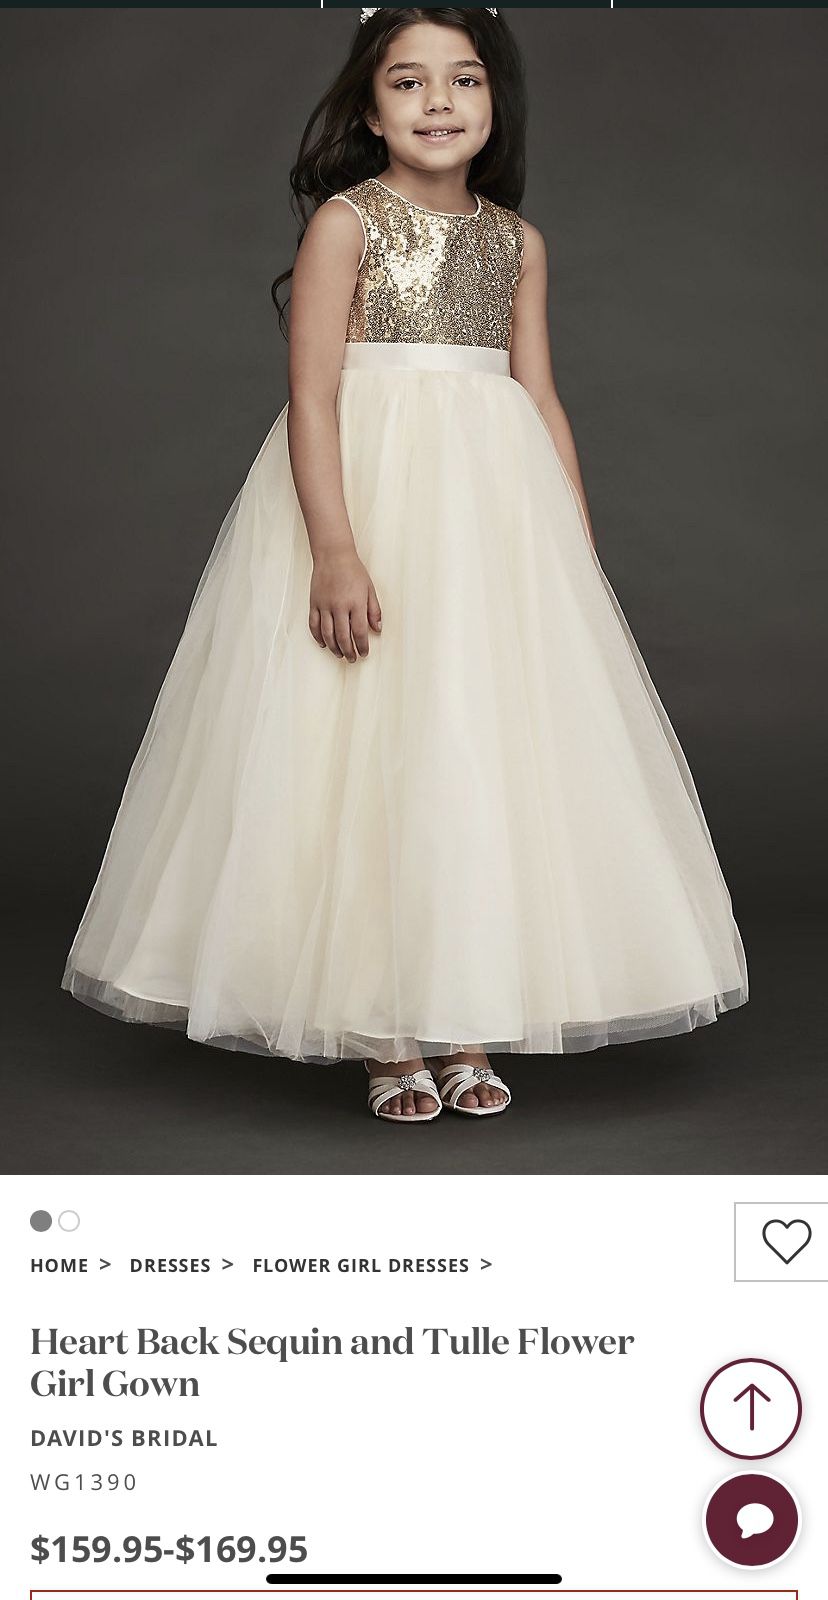 NEW Beautiful David’s Bridal Flower girl Or Party Dress